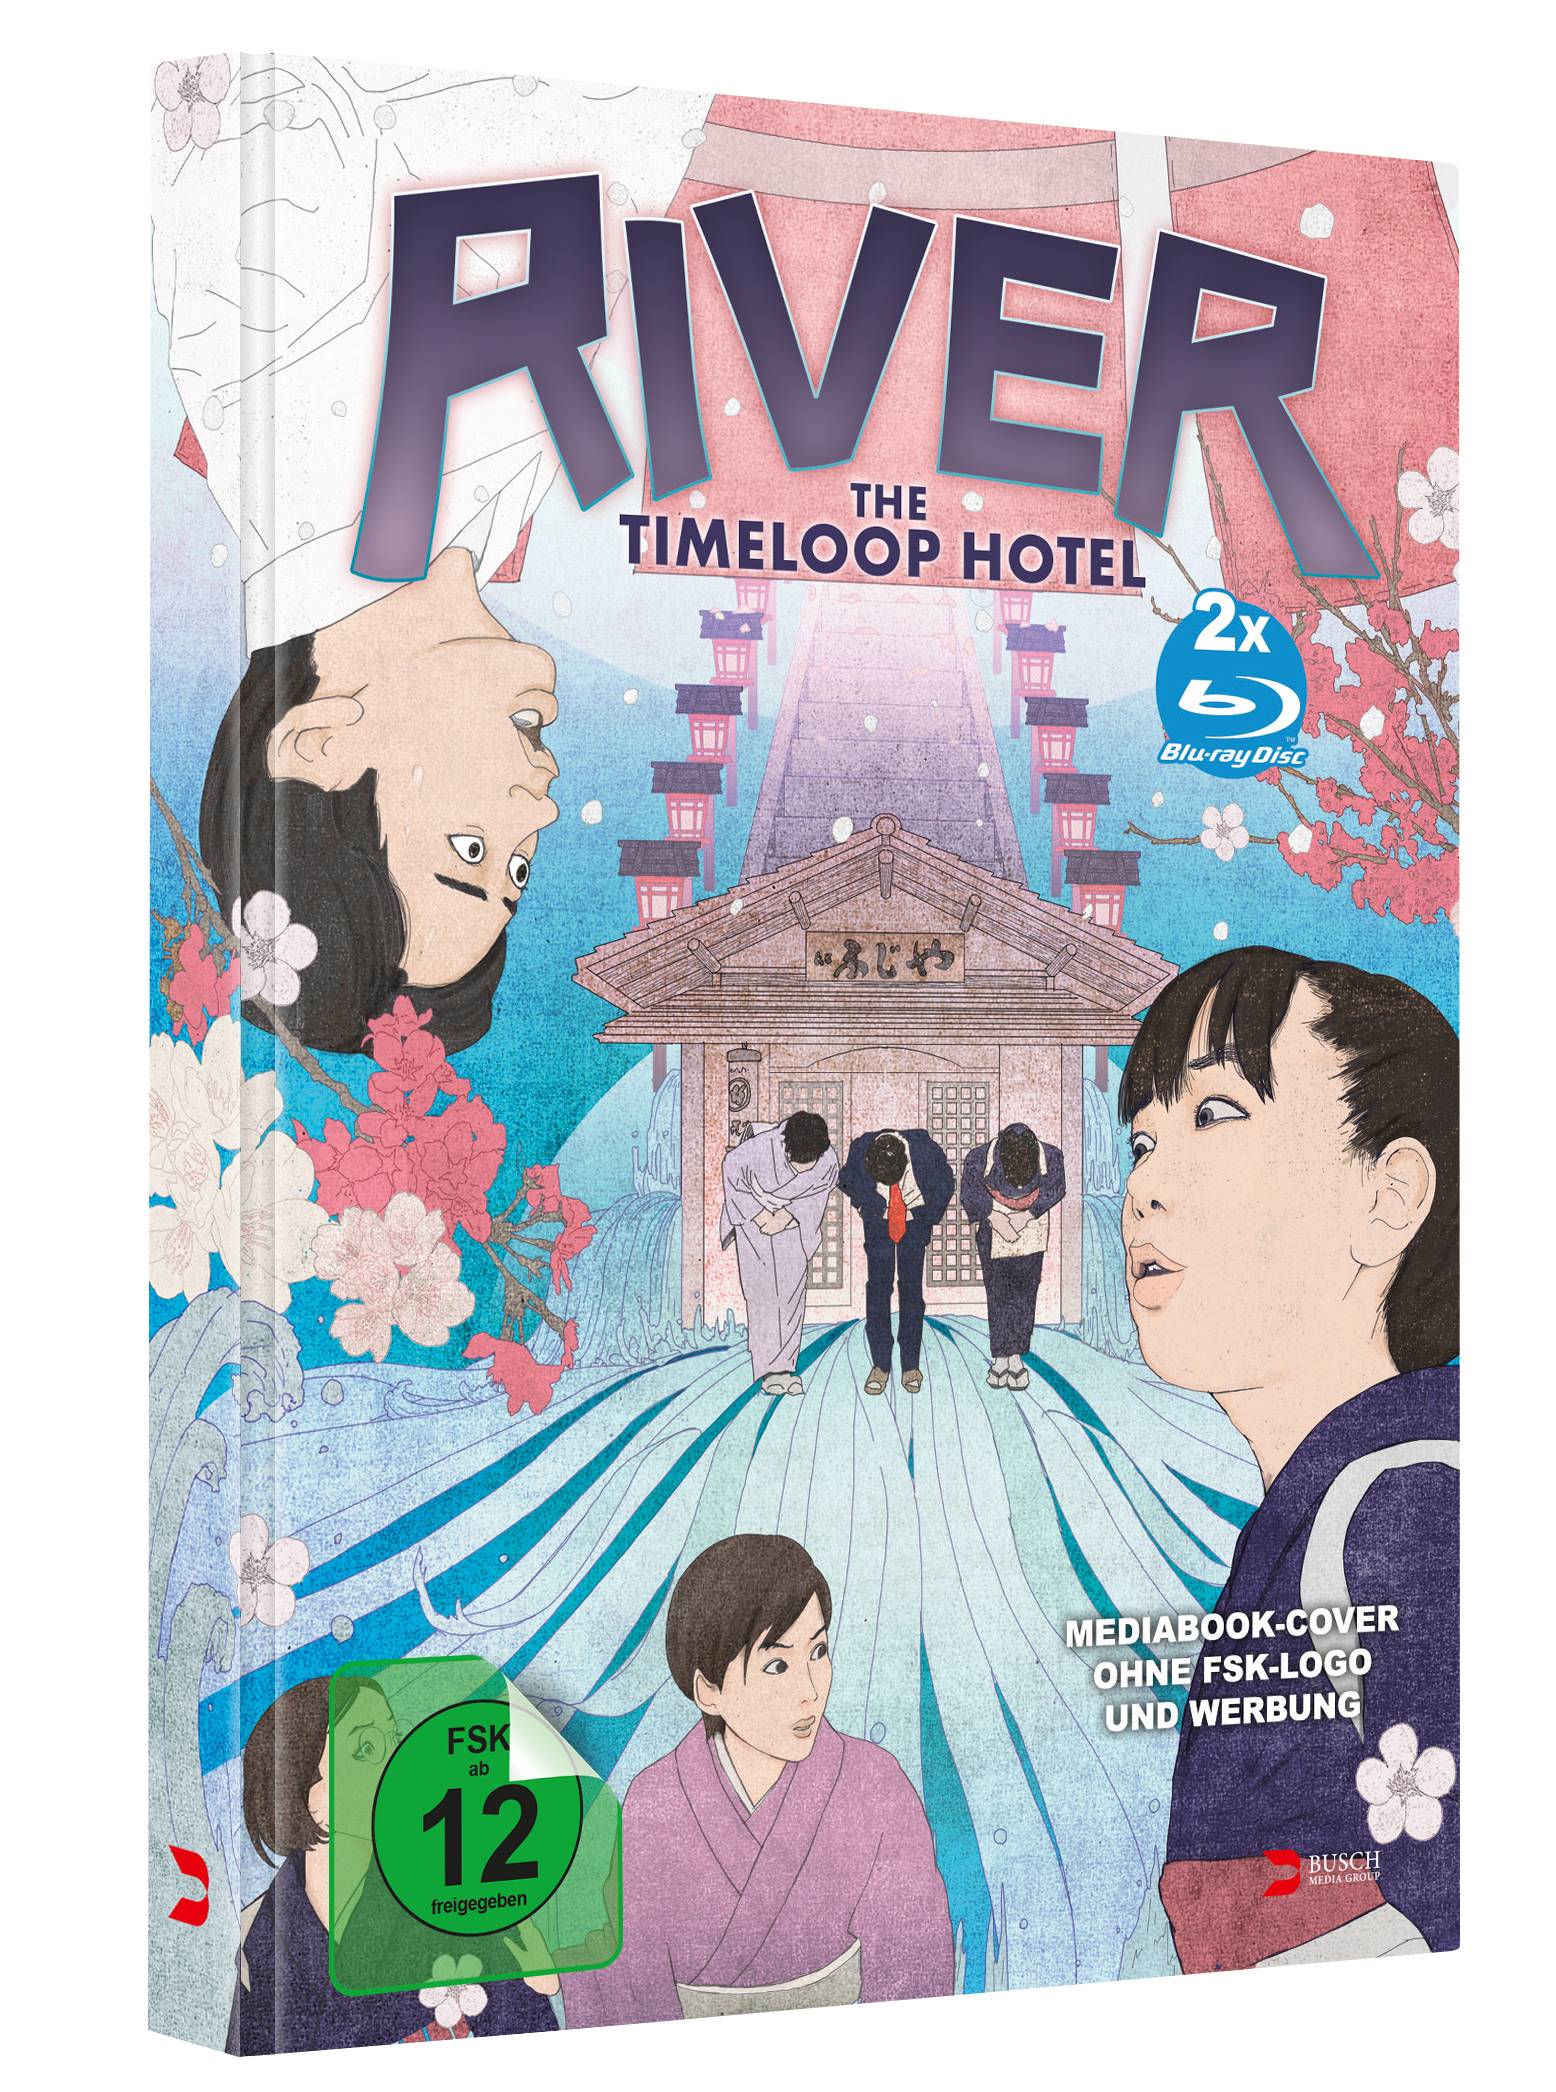 River - The Timeloop Hotel -  2-Disc Limited Edition Mediabook